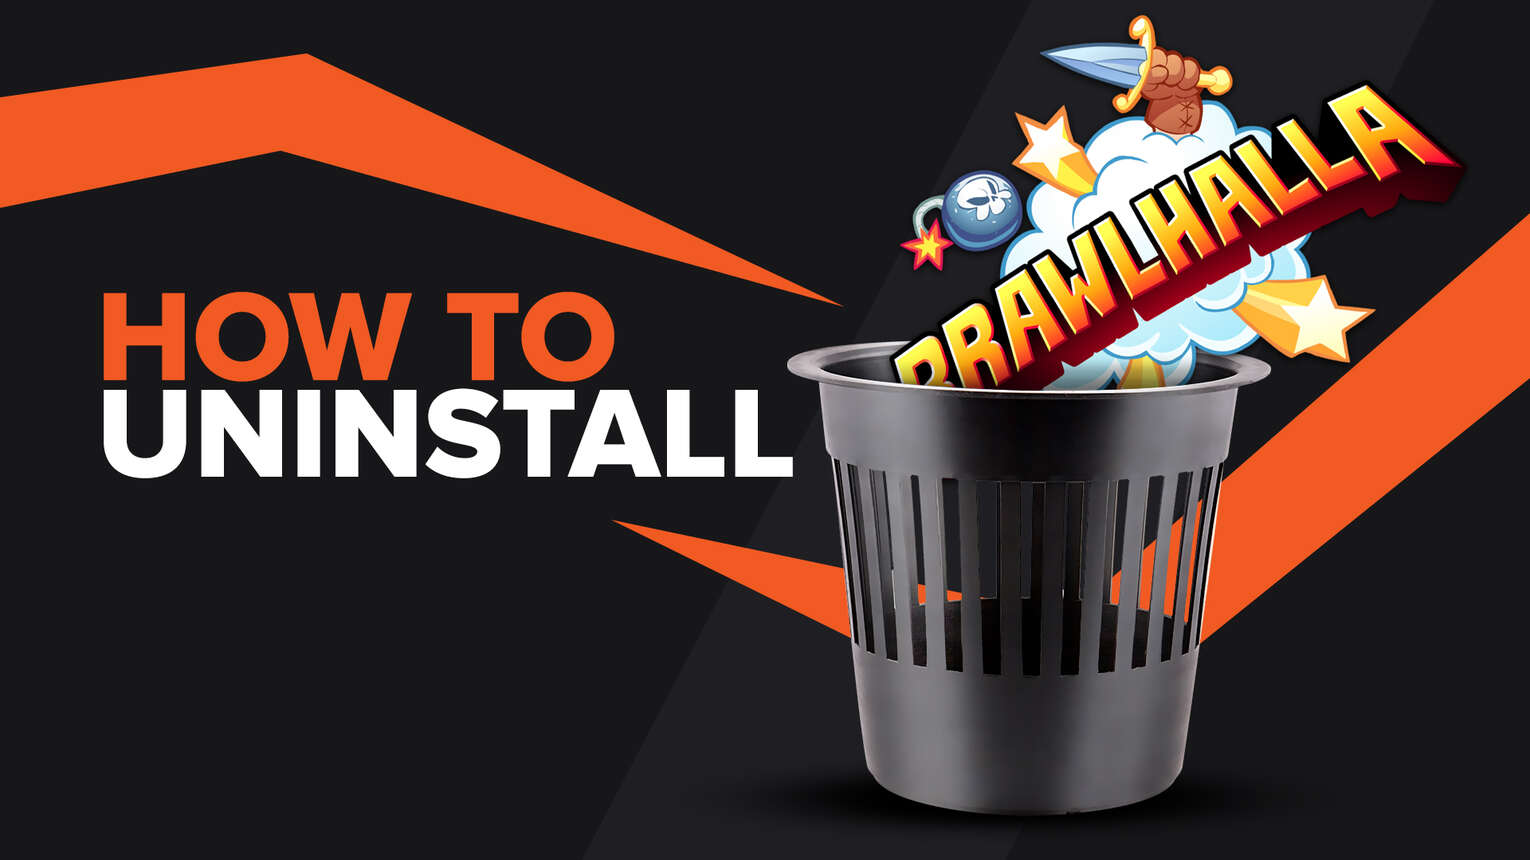 How To Uninstall & Delete Data for Brawlhalla on PC